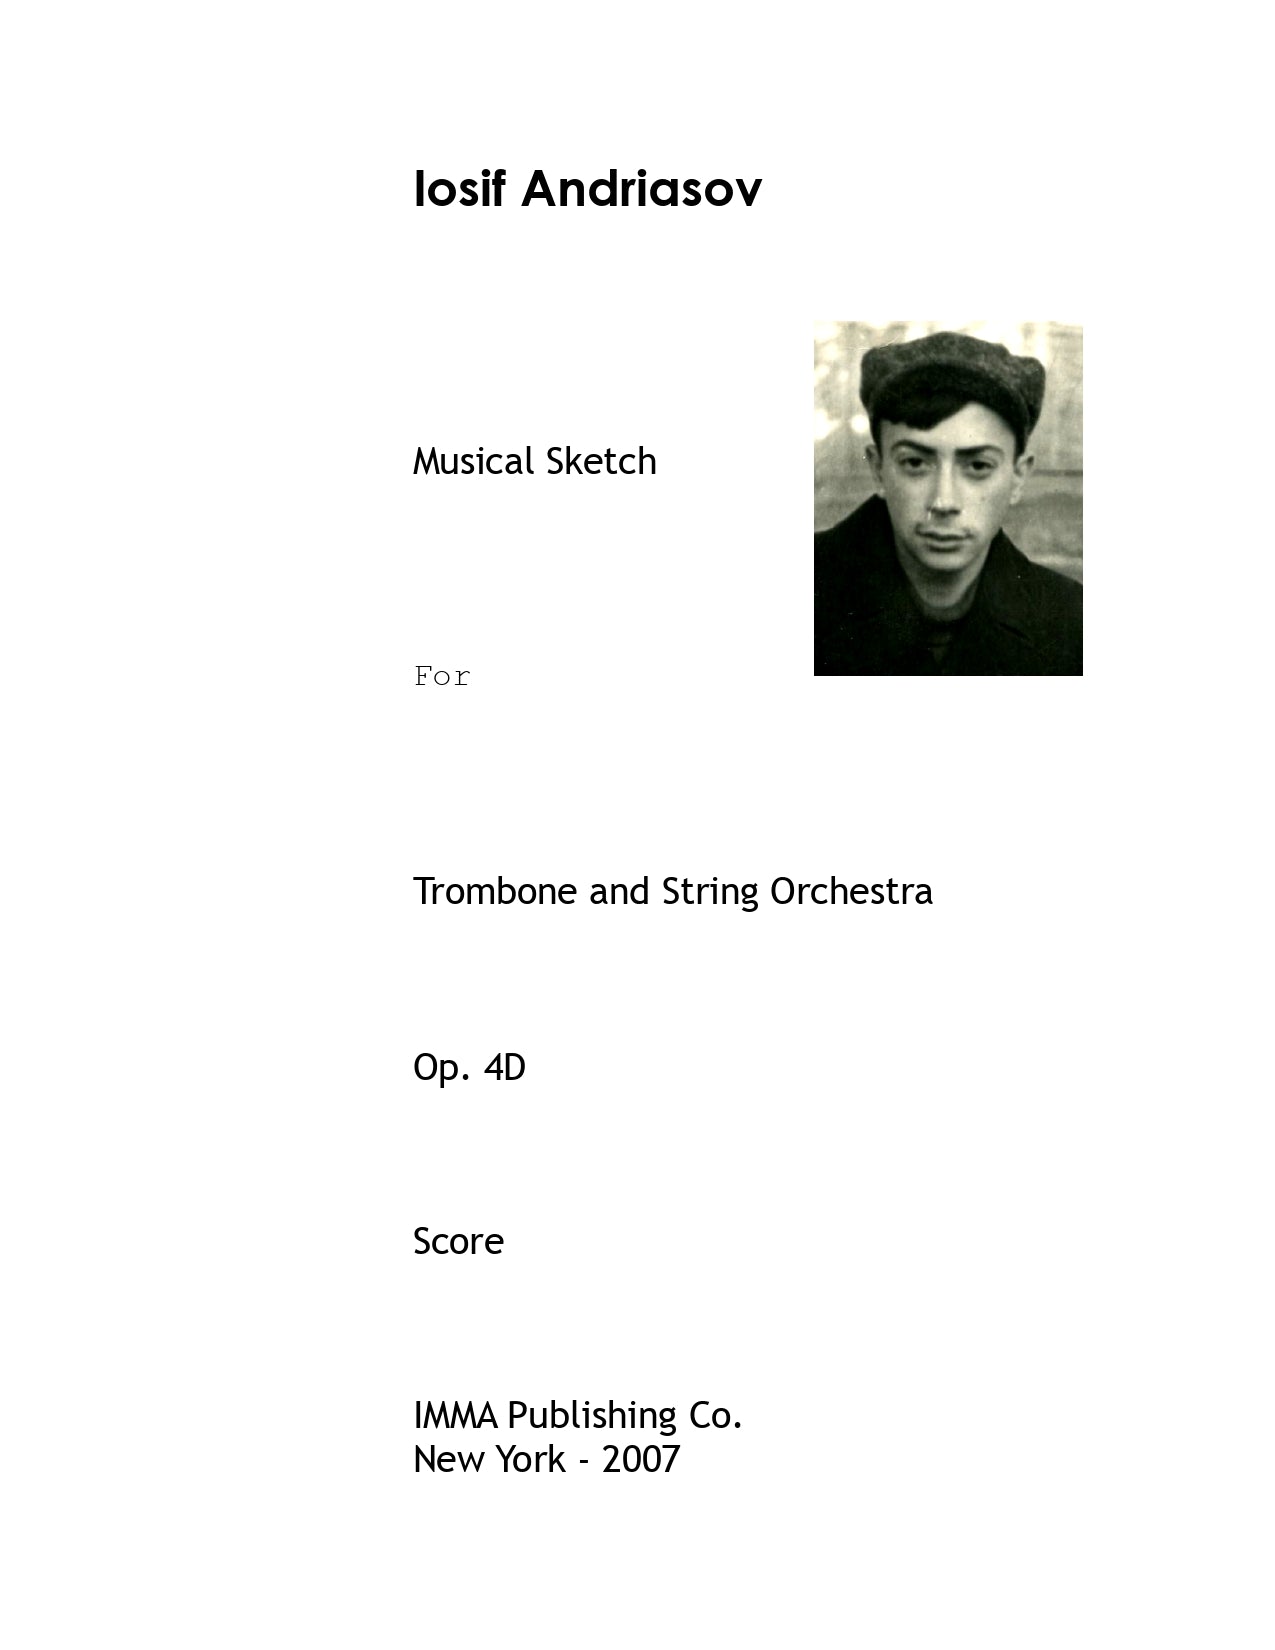 014. Iosif Andriasov - Musical Sketch, Op. 4D for Trombone and String Orchestra.